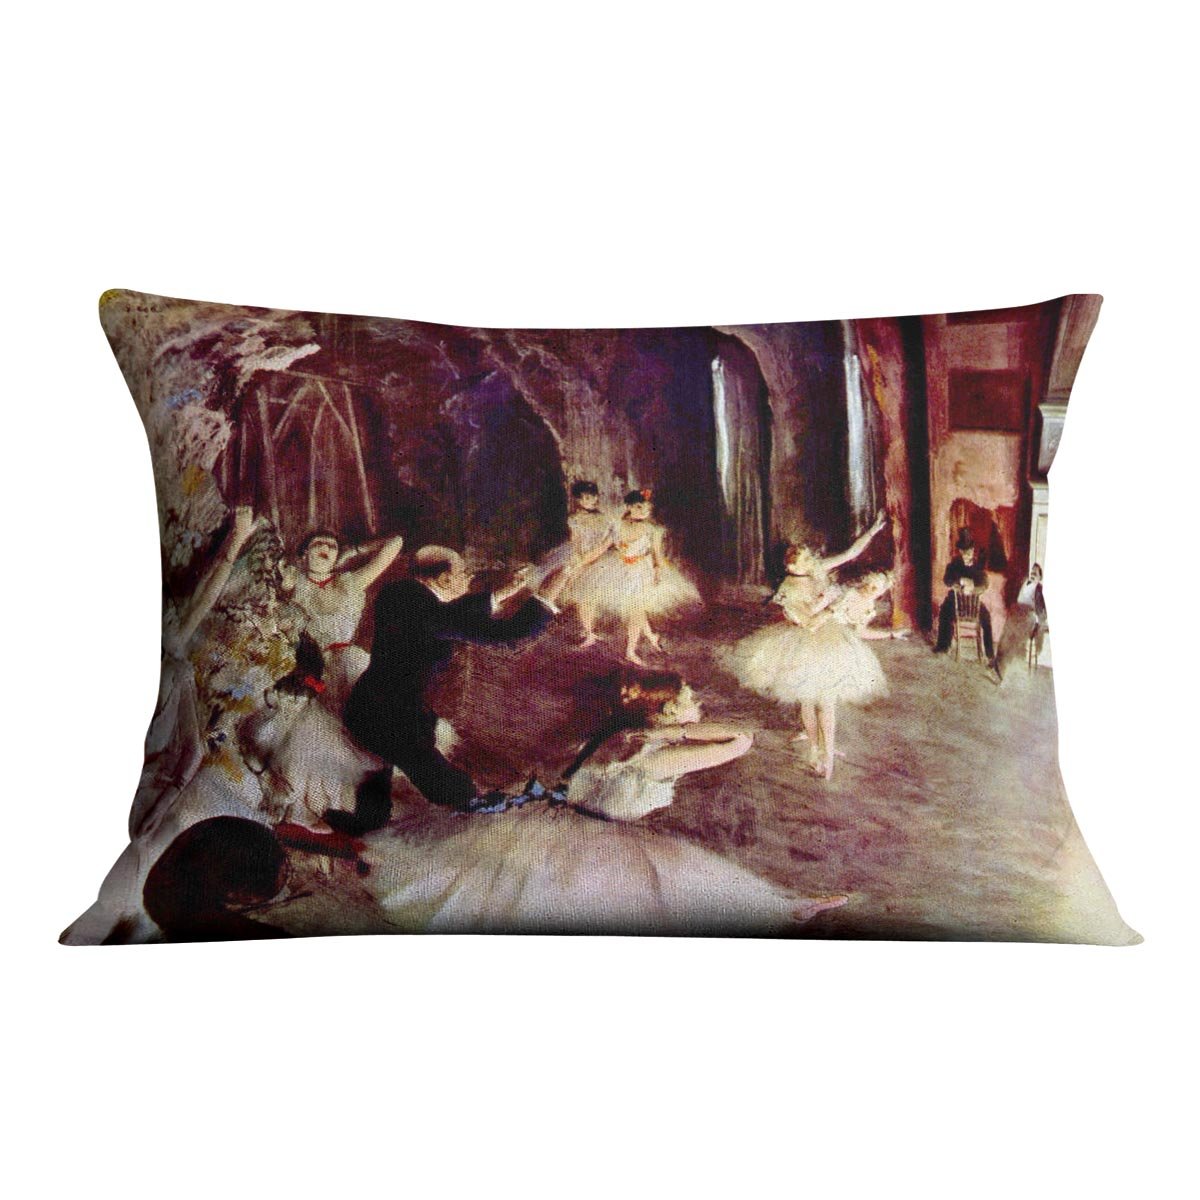 Stage trial by Degas Cushion